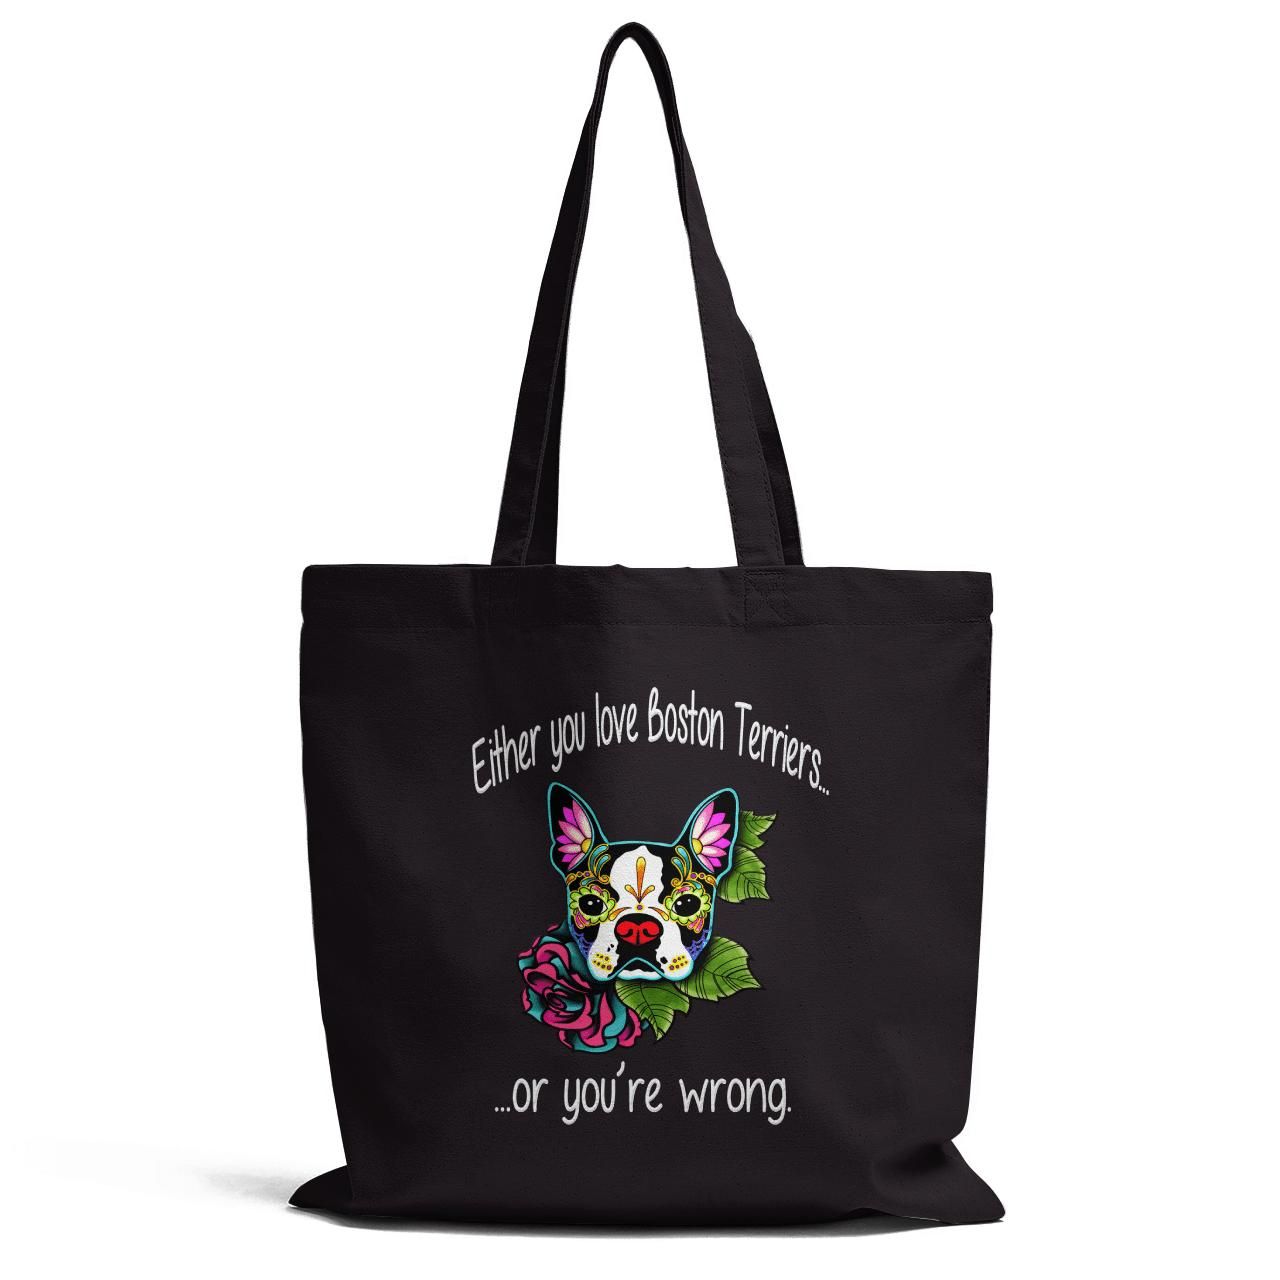 Either Your Love Boston Terriers Or You Are Wrong Tote Bag